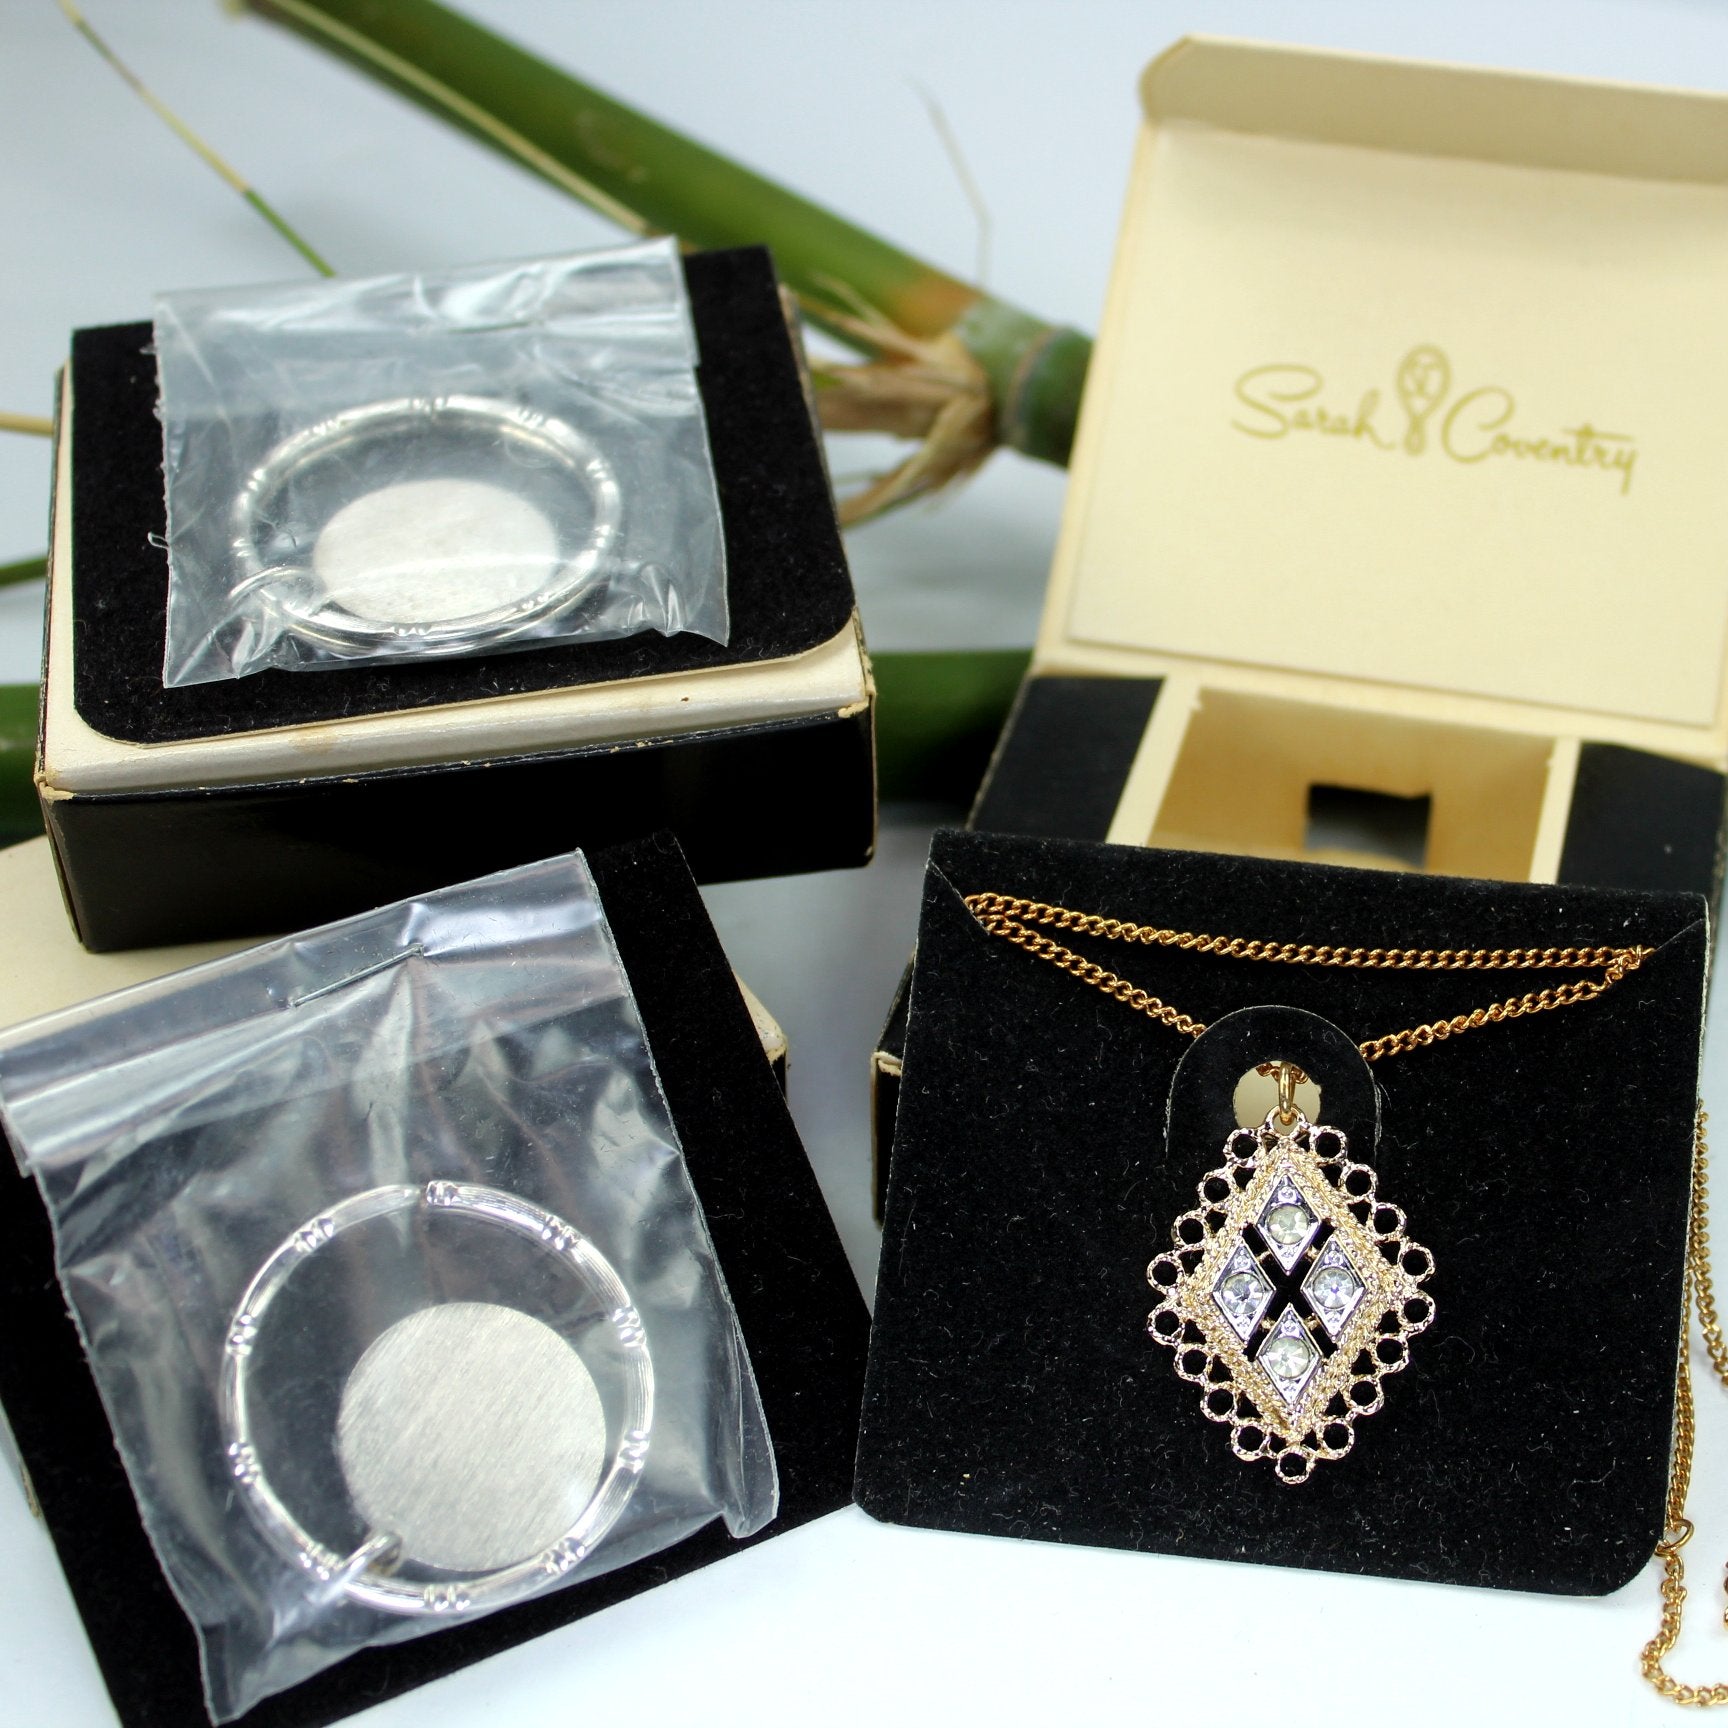 Sarah Vintage New Collection Necklace Key Rings Original Boxes Holiday Series closer view out of box